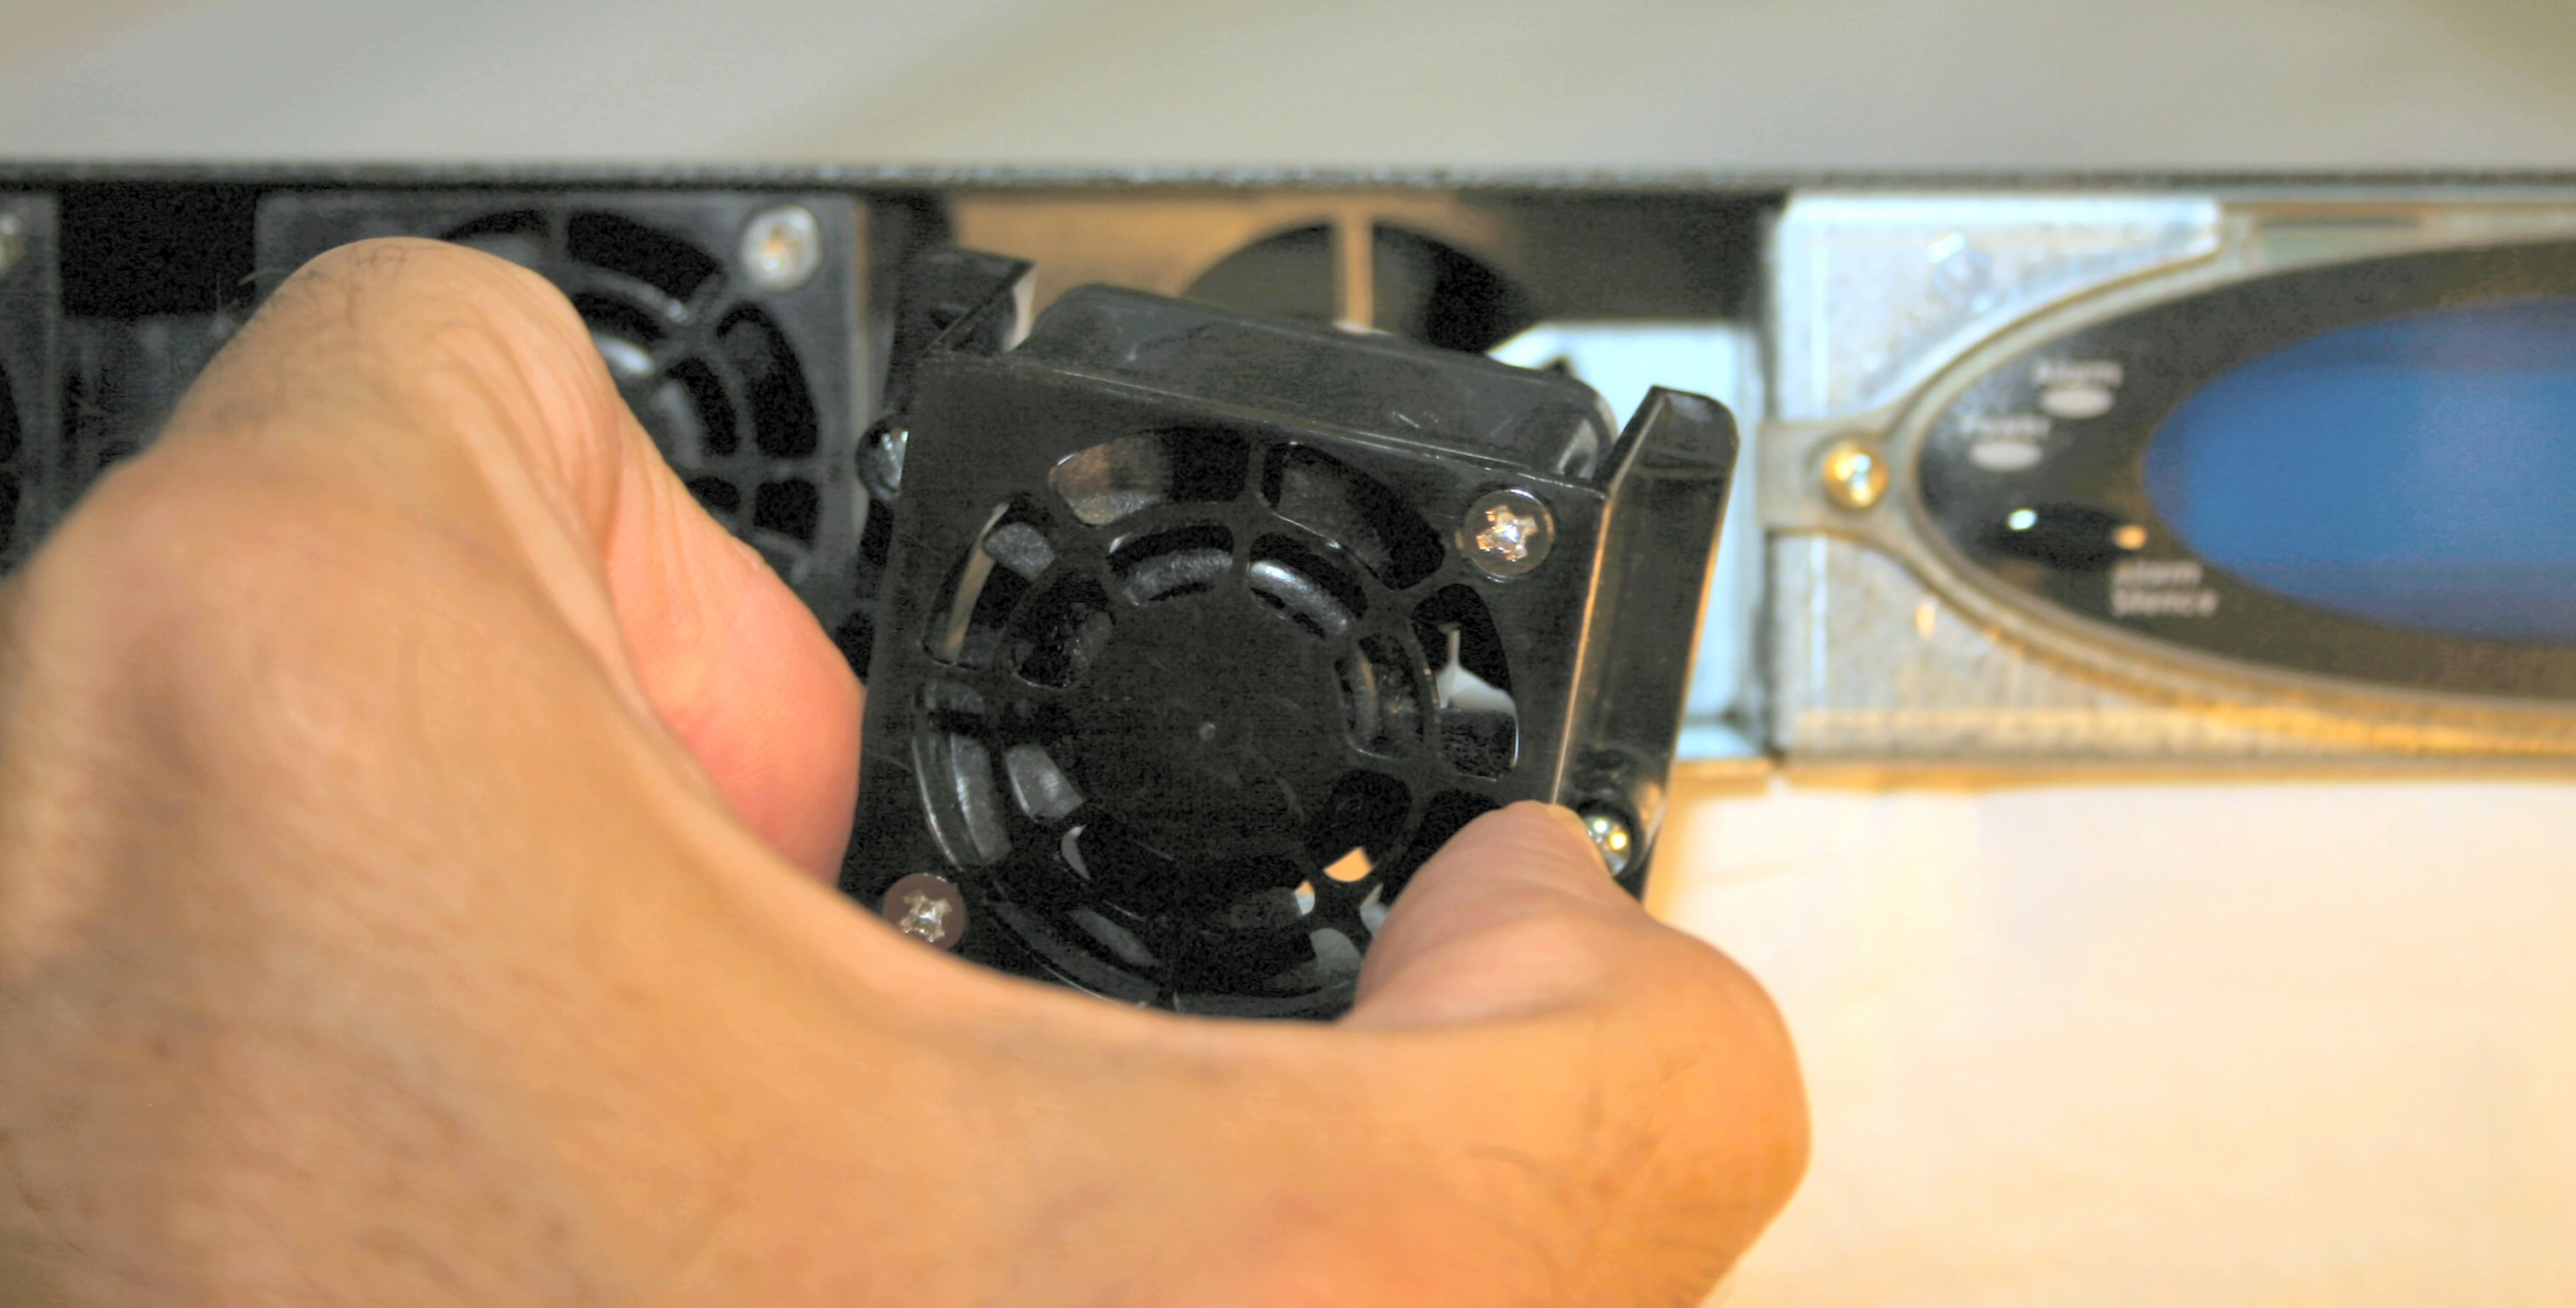 This picture shows someone inserting the fan into the chassis slot.